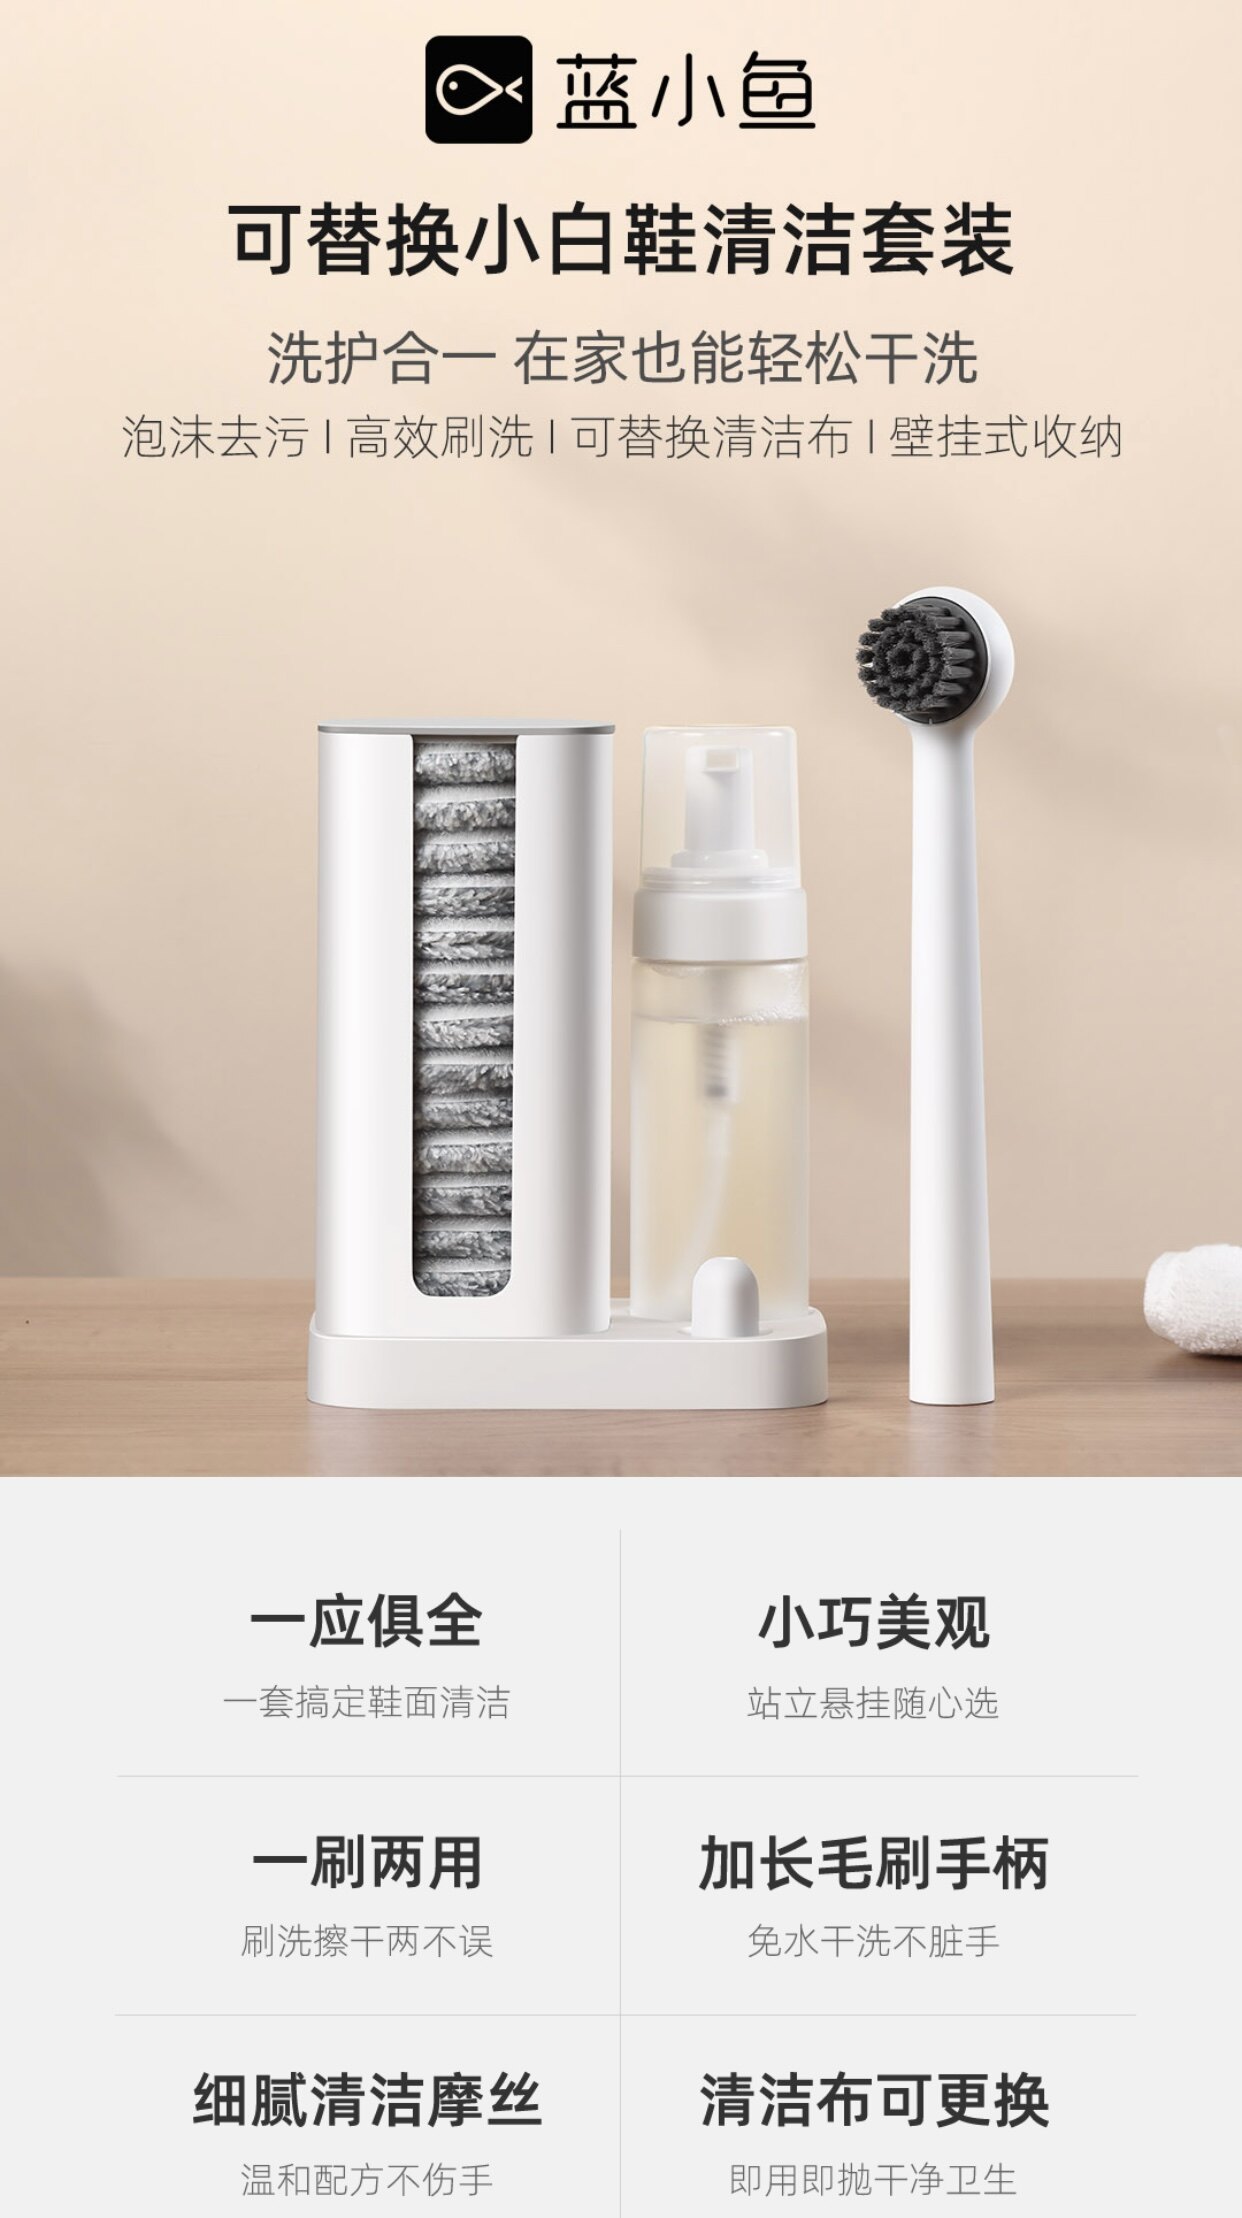 ❇️NEW ARRIVAL❇️ XIAOMI YOUPIN SNEAKERS 👟 CLEANING SET 可替换小白鞋清洁套装👟